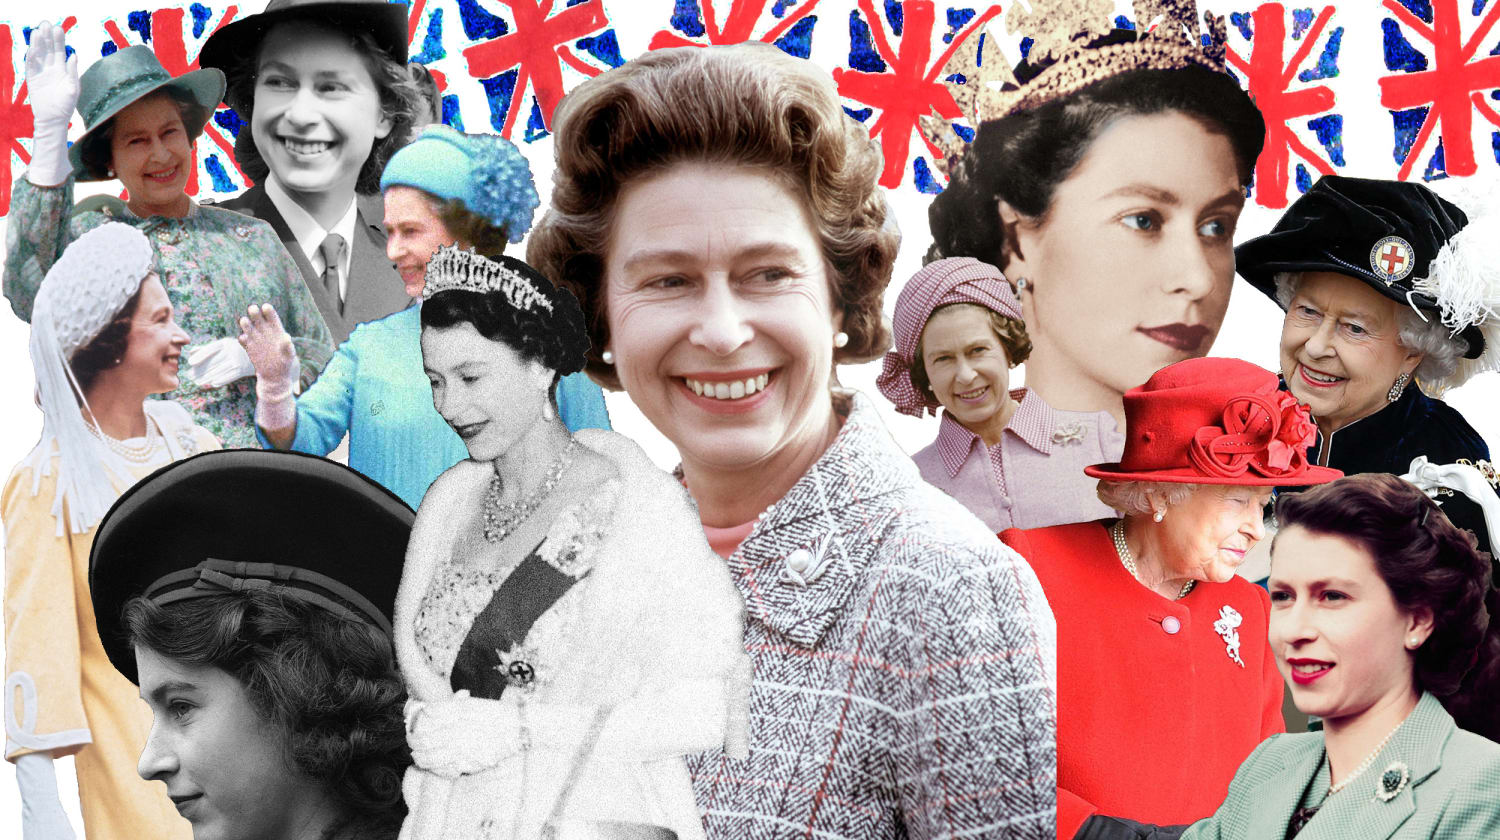 Queen Elizabeth's Platinum Jubilee: What to know and how to watch